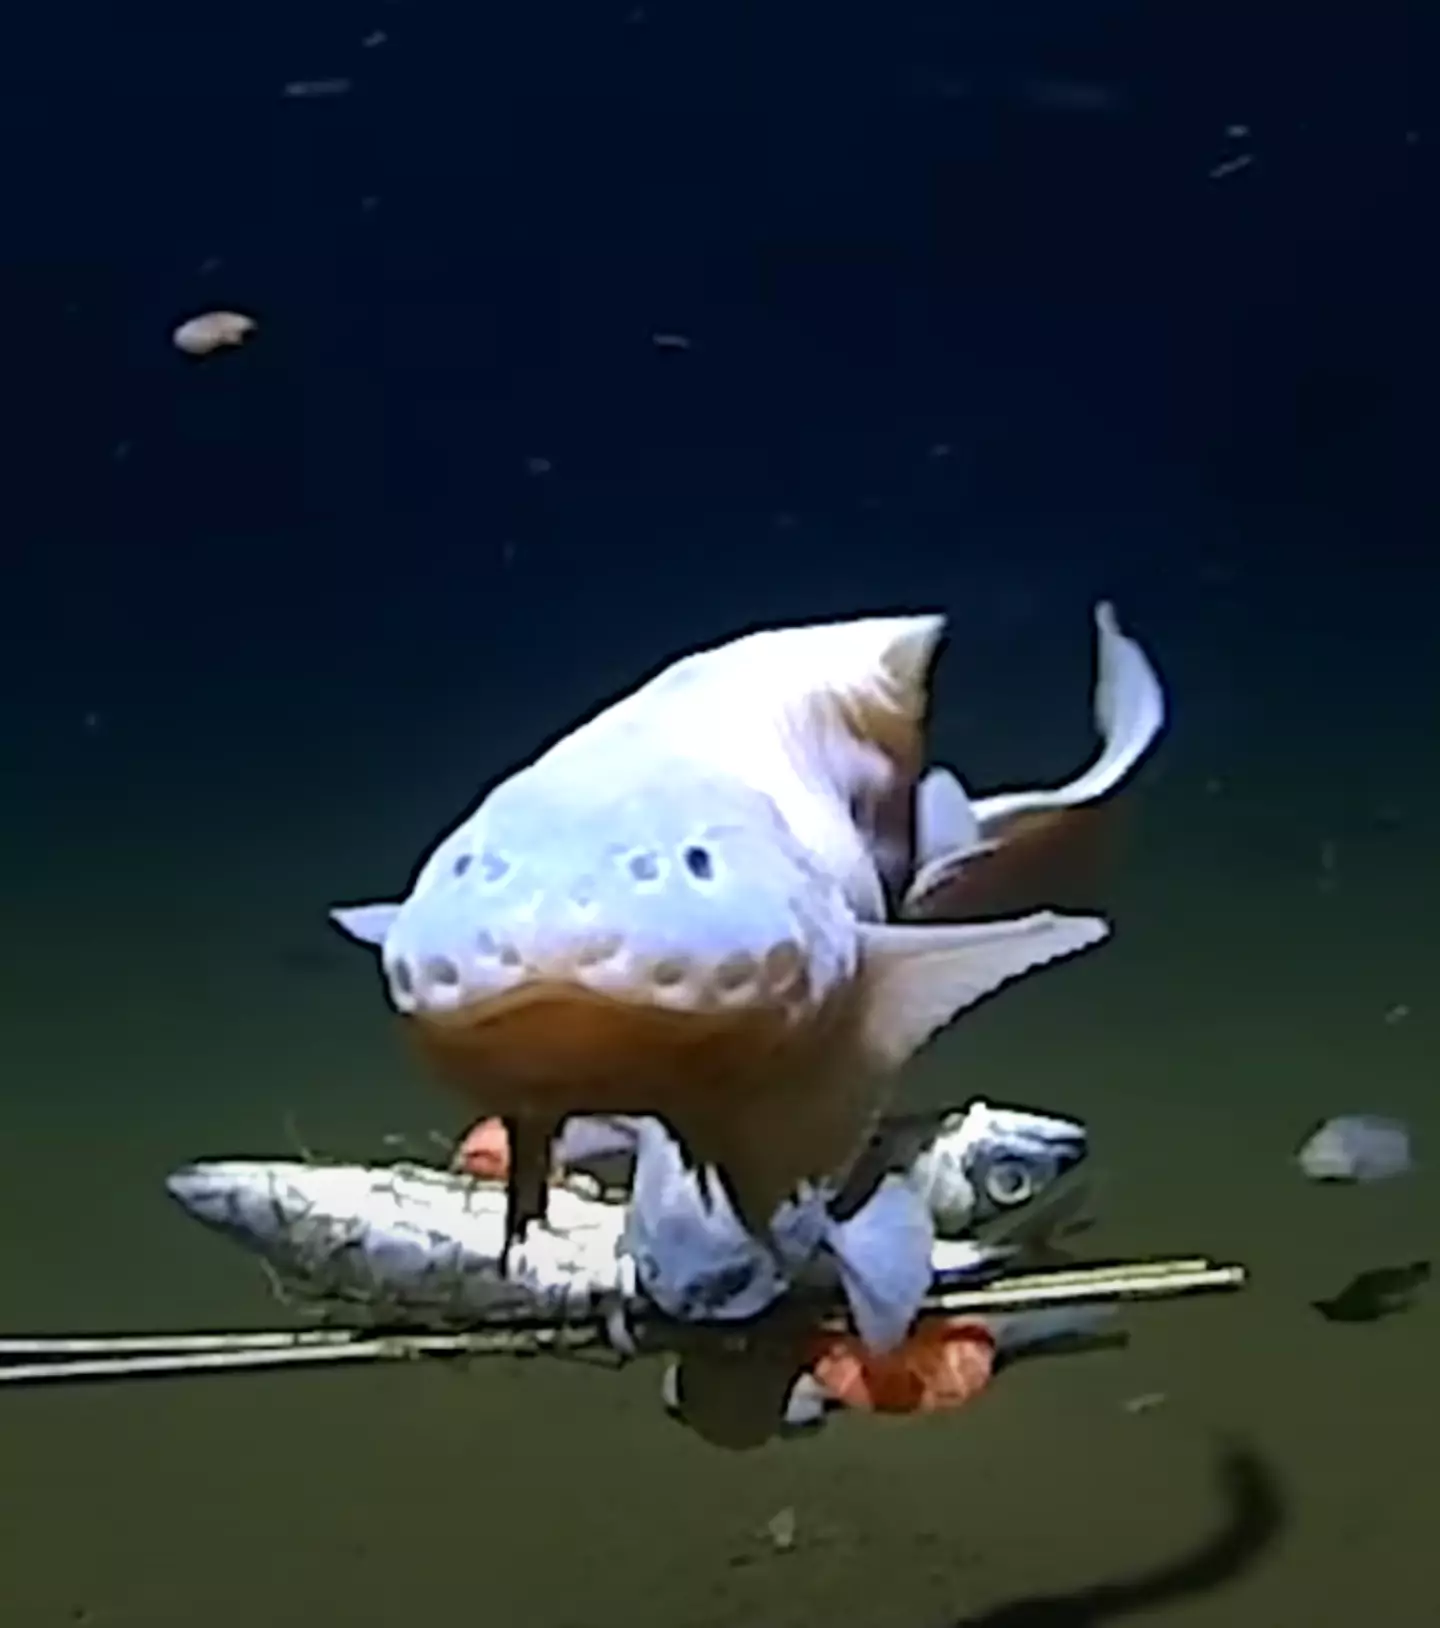 Don't expect the snailfish to win any prizes at a beauty contest.